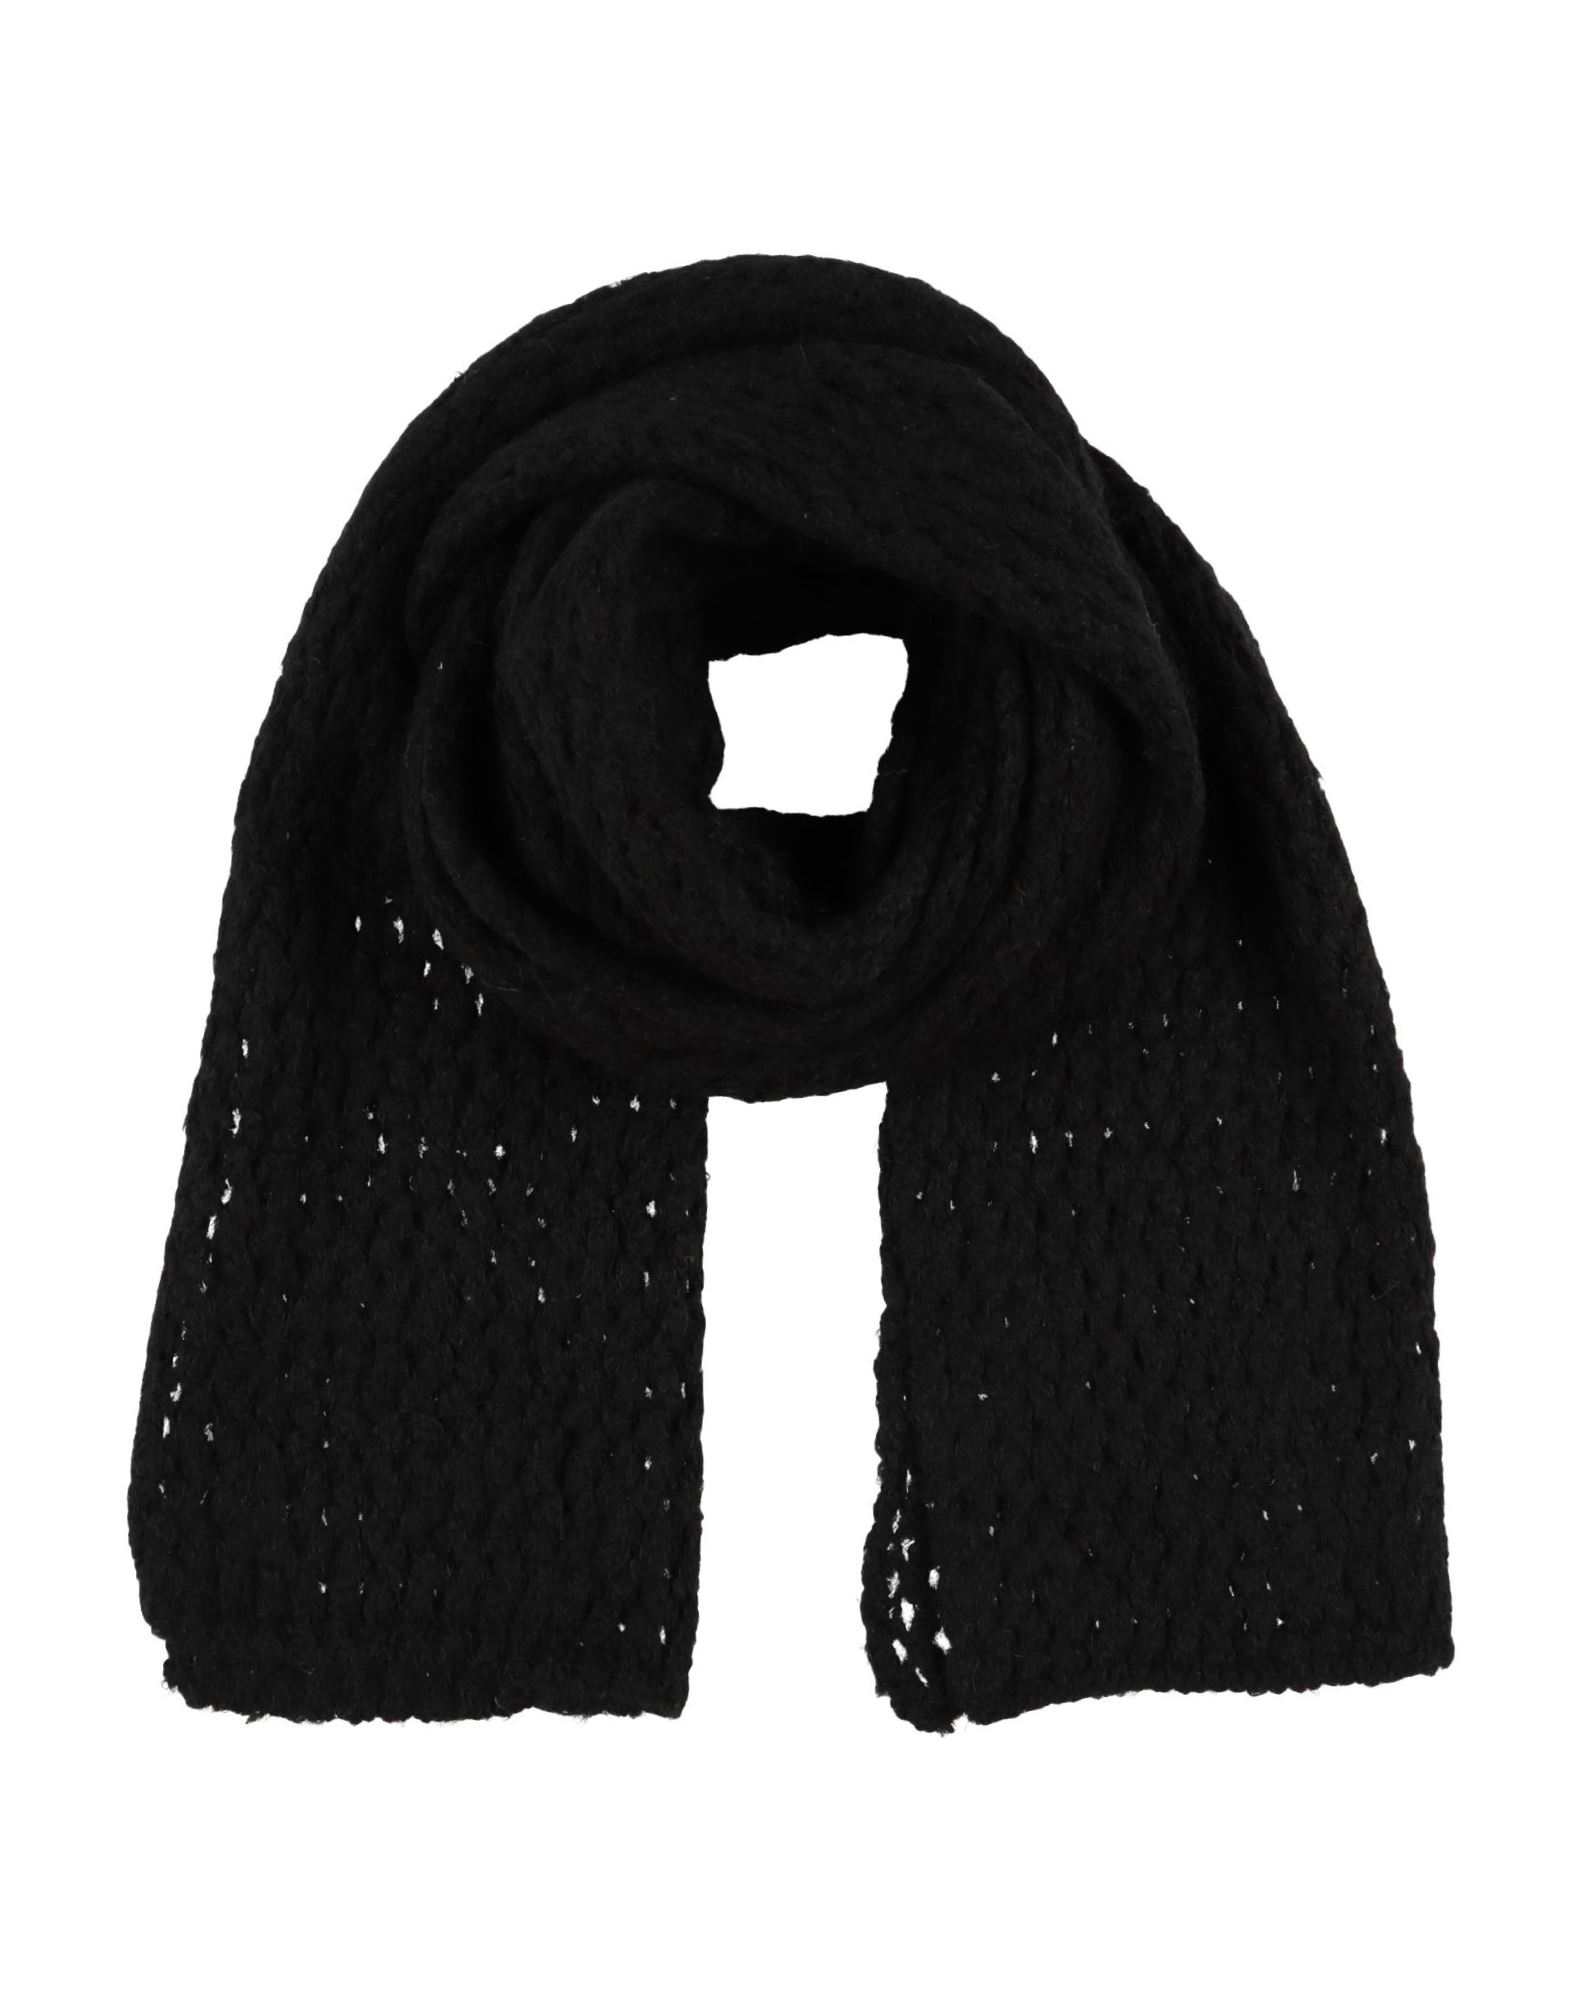 Anonyme Designers Scarves In Black